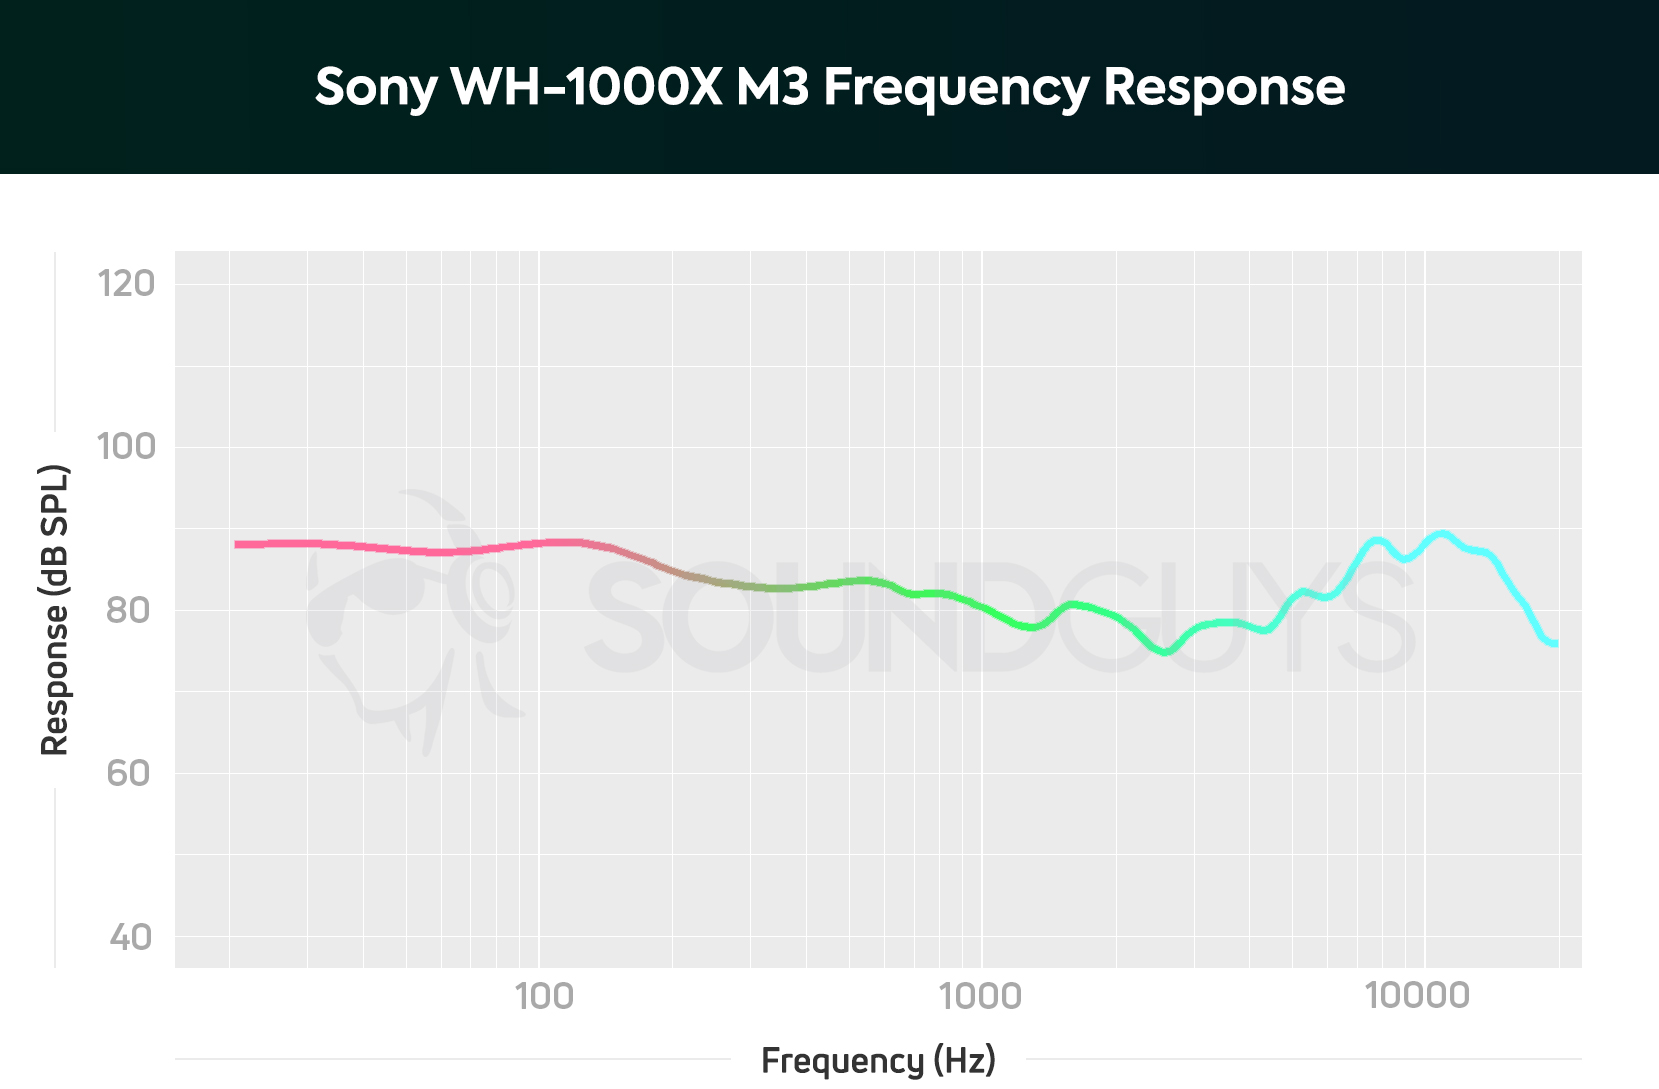 A chart showing the frequency response data from the Sony WH-1000X M3.